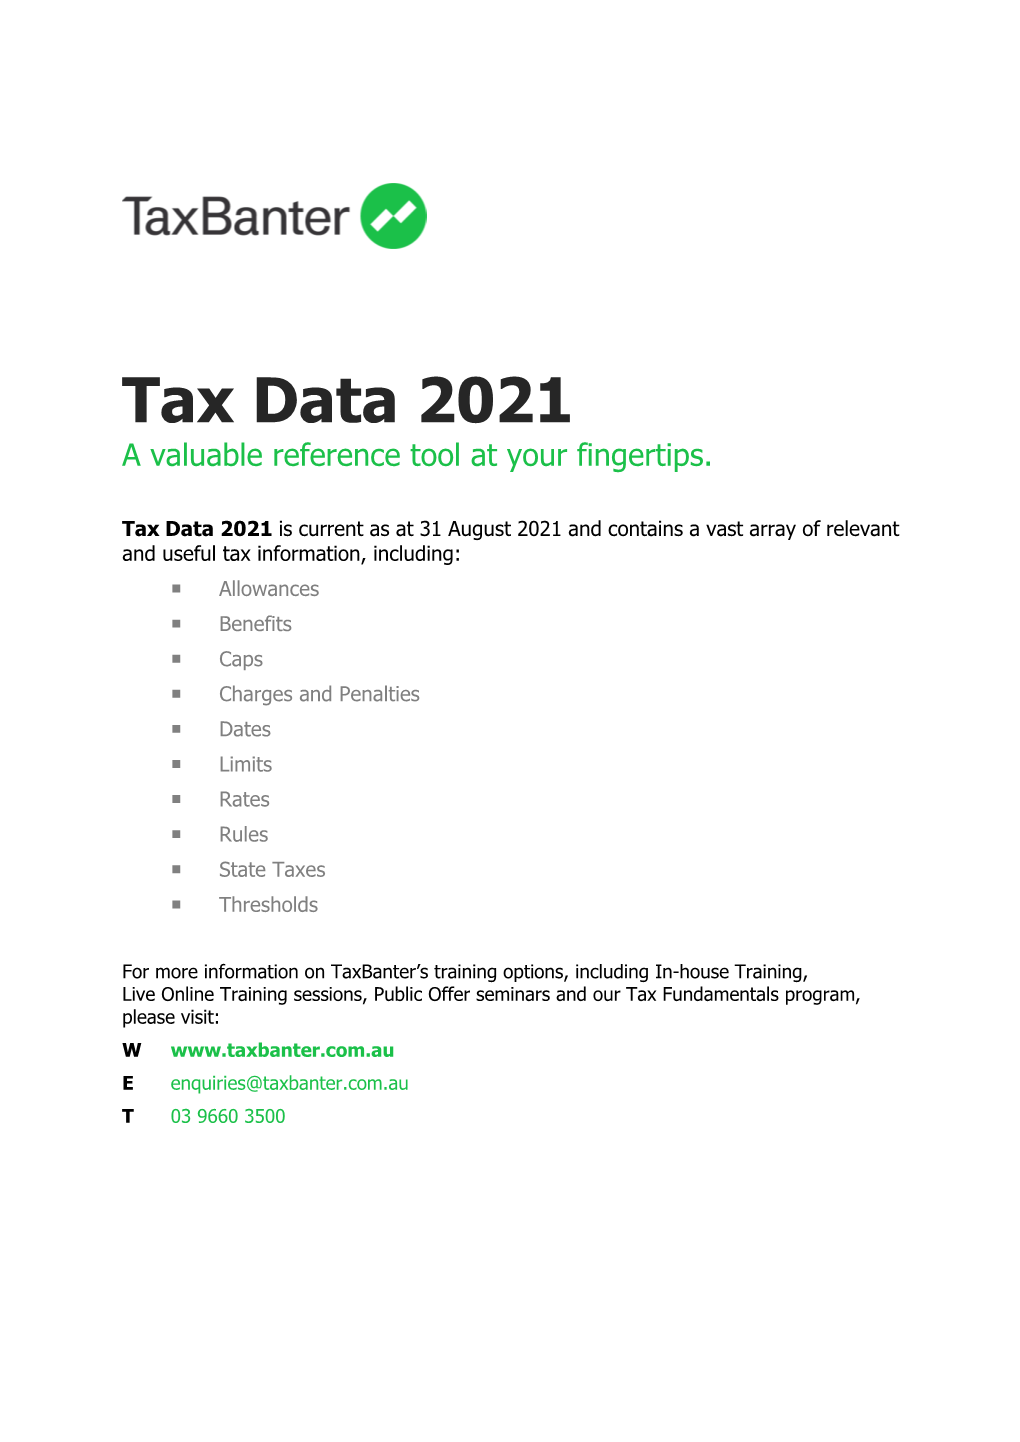 Tax Data 2021 a Valuable Reference Tool at Your Fingertips